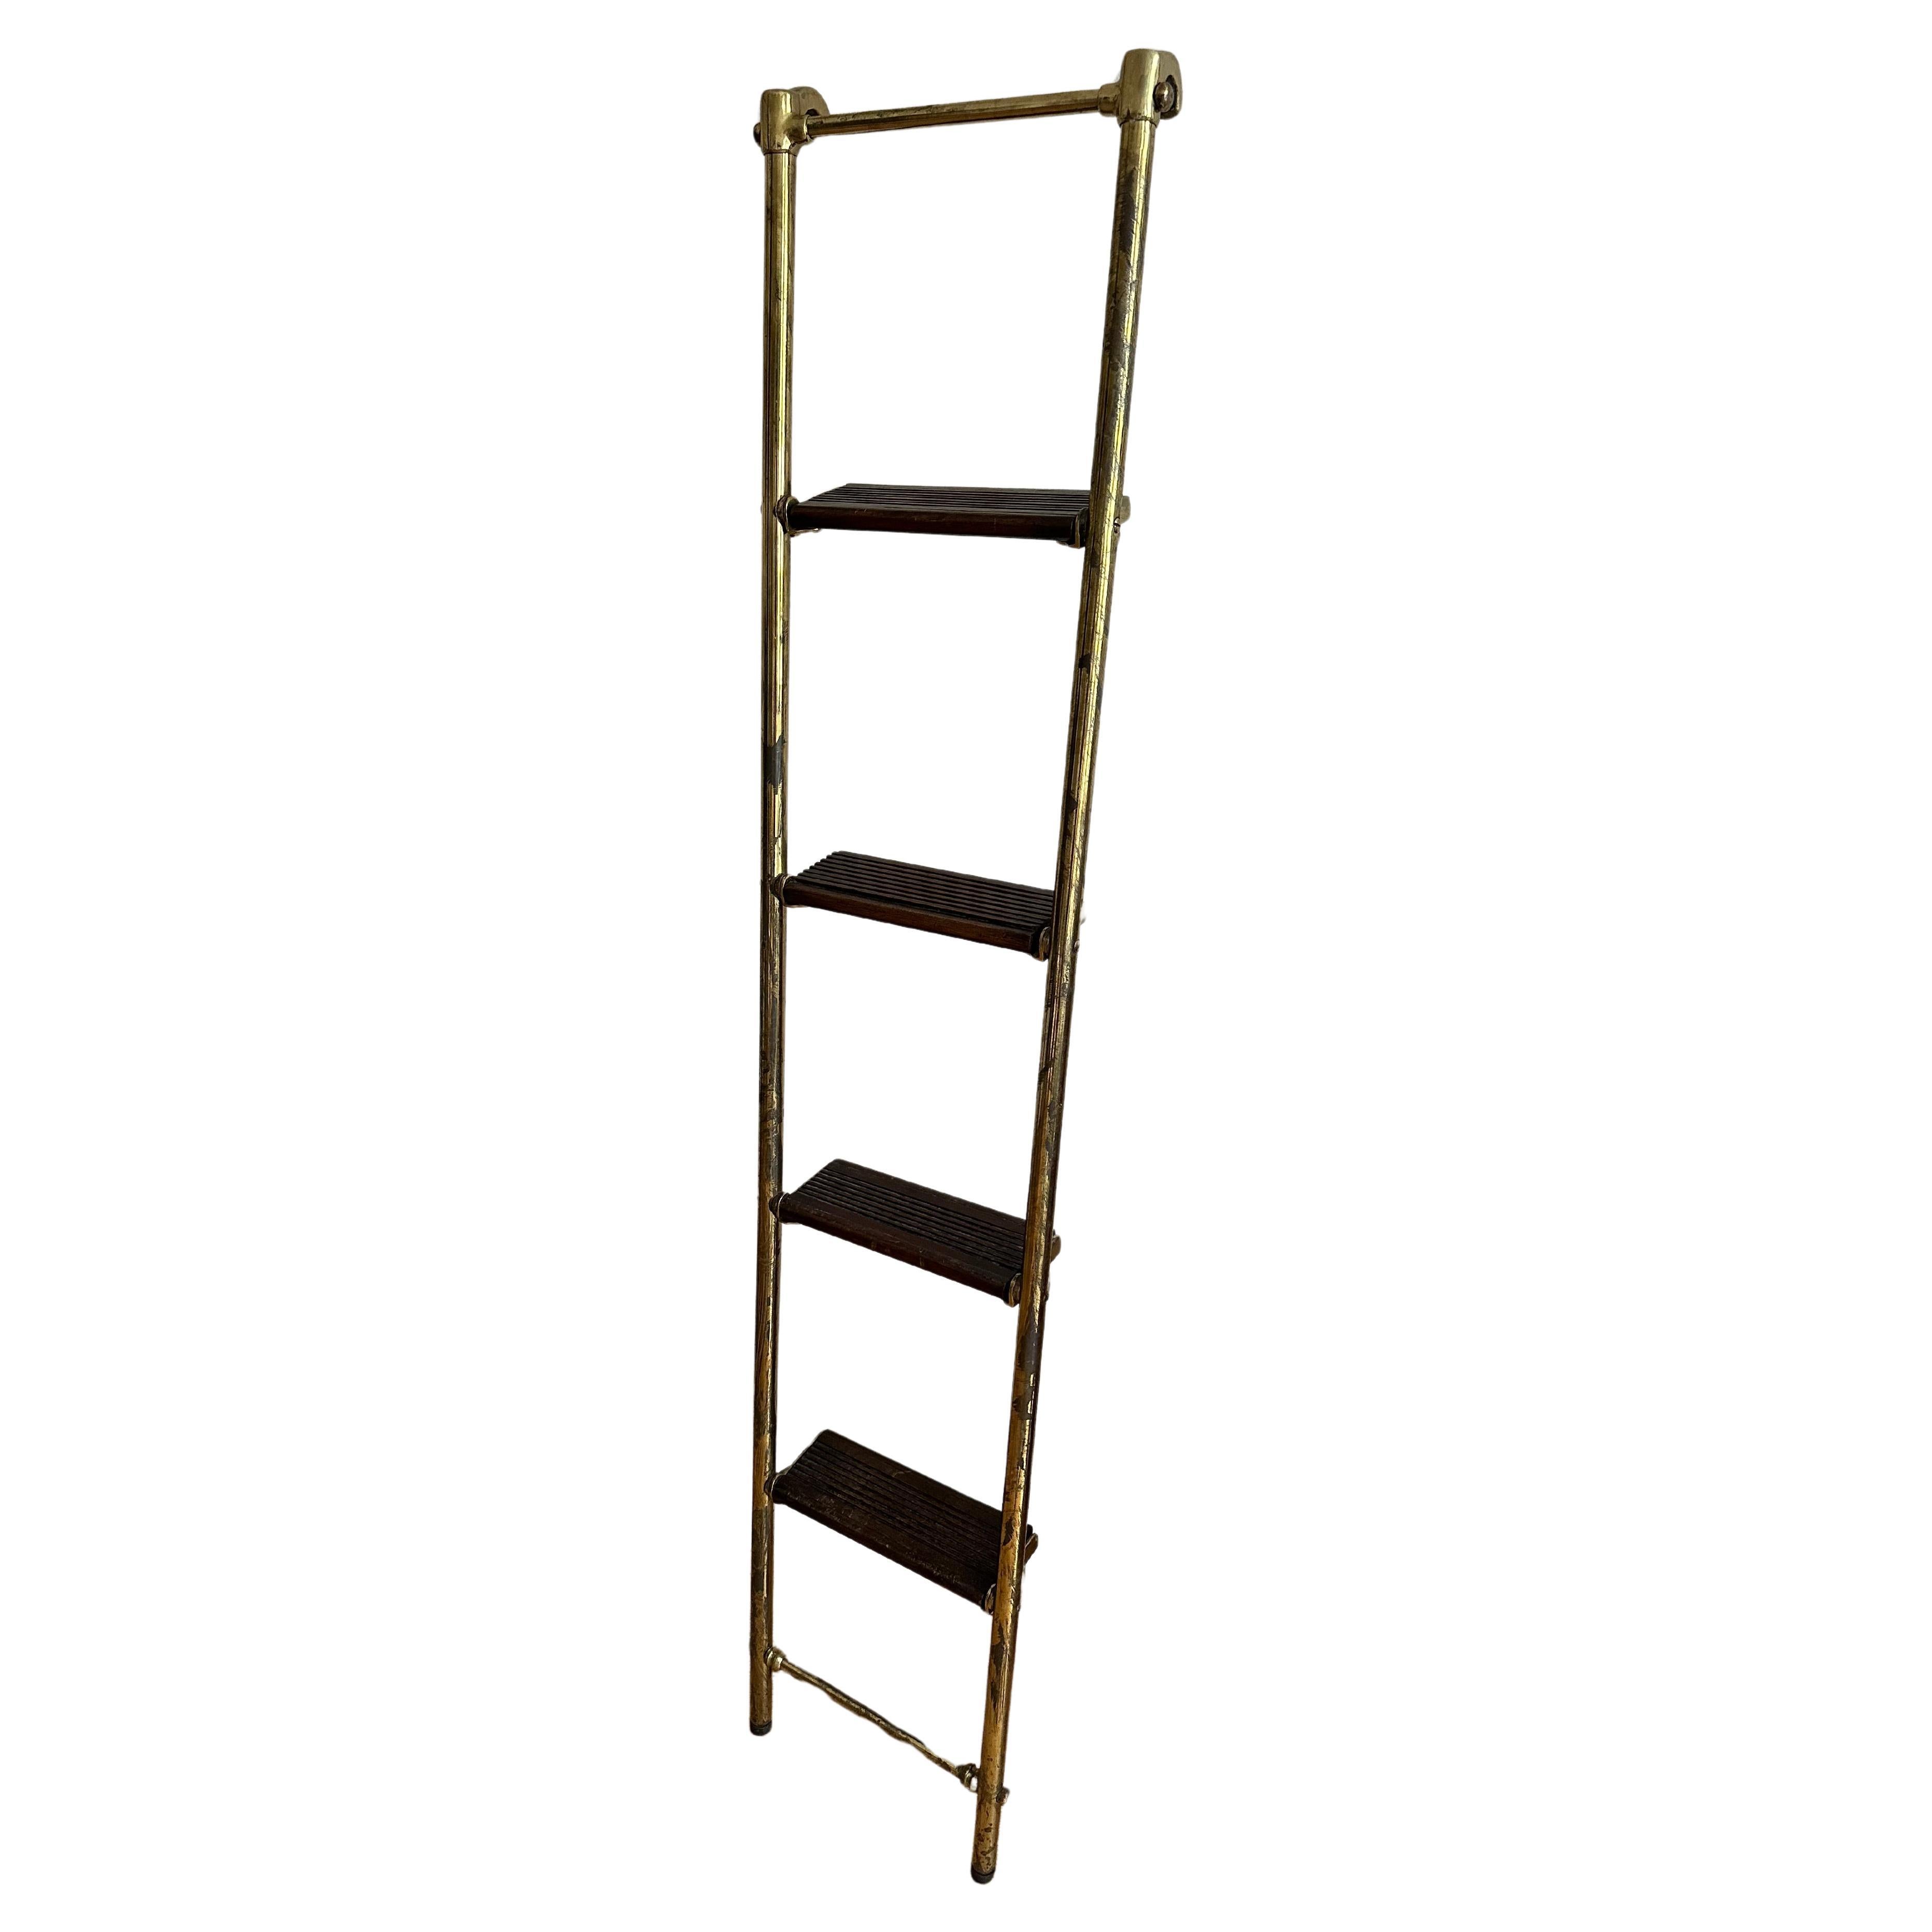 Authentic Antique Brass Ship’s Ladder from the Late 19th Century
